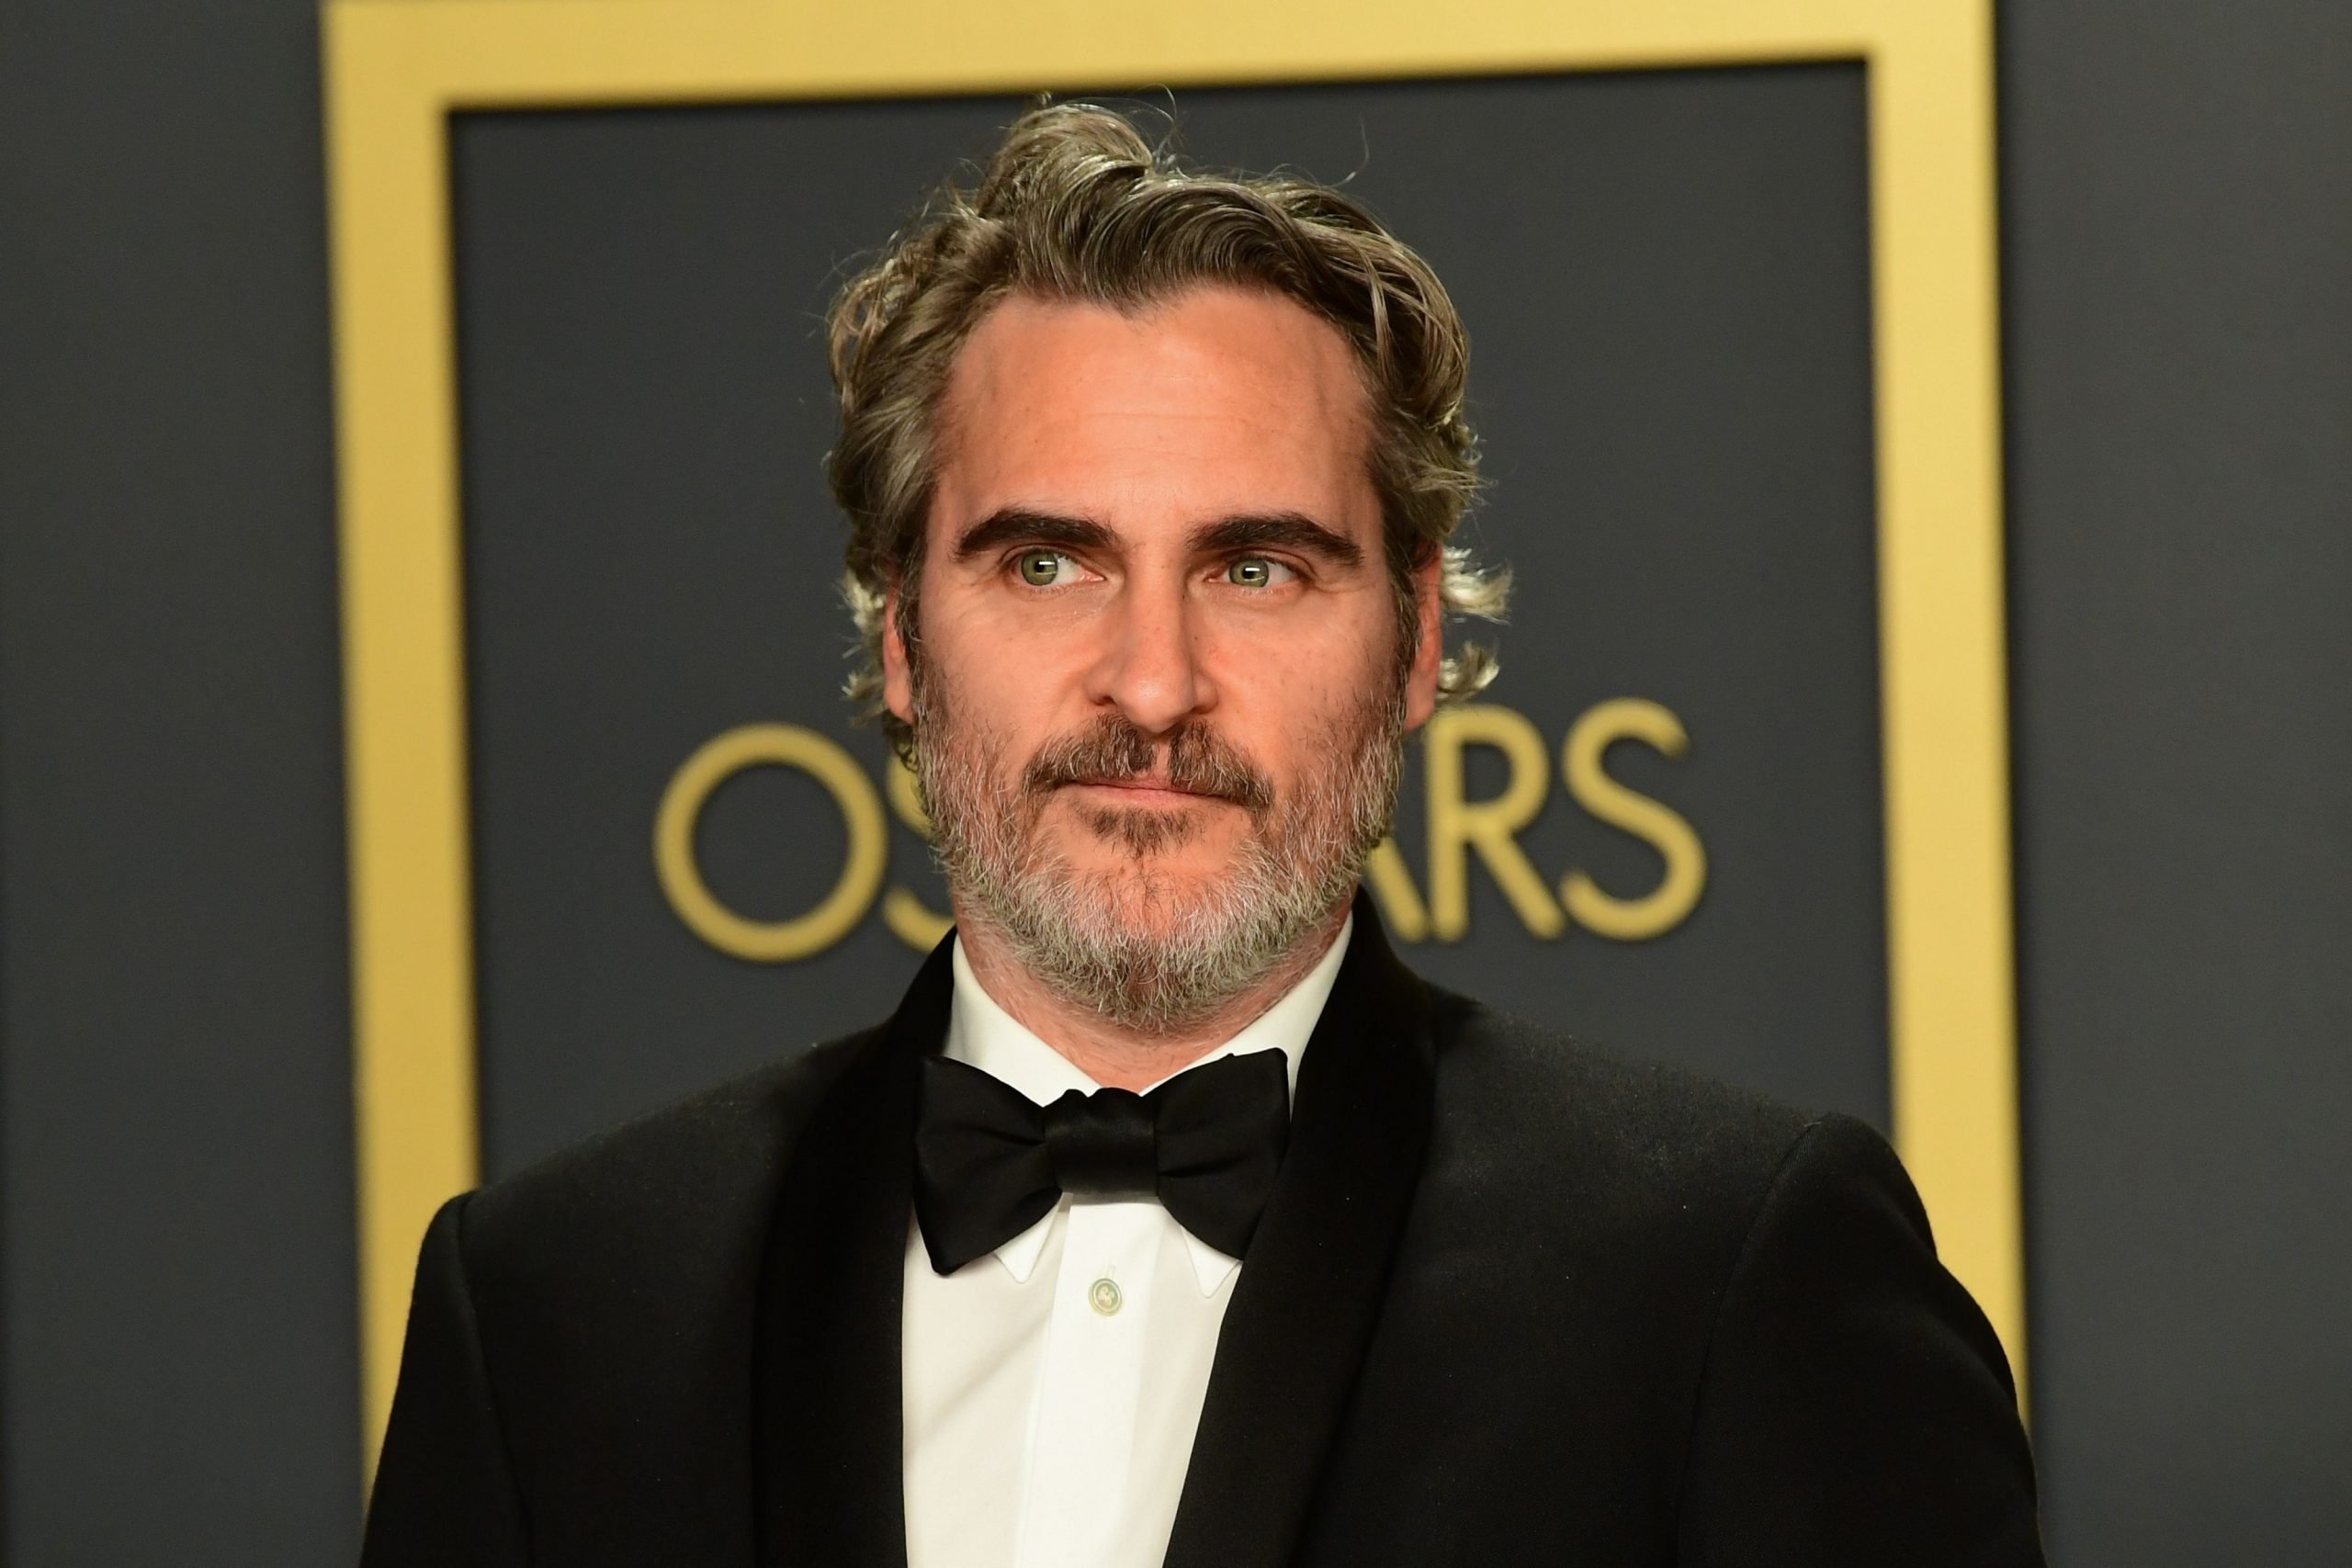 ‘C’mon C’mon’ Trailer: Joaquin Phoenix Plays the Role of a Doting Uncle to His Nephew